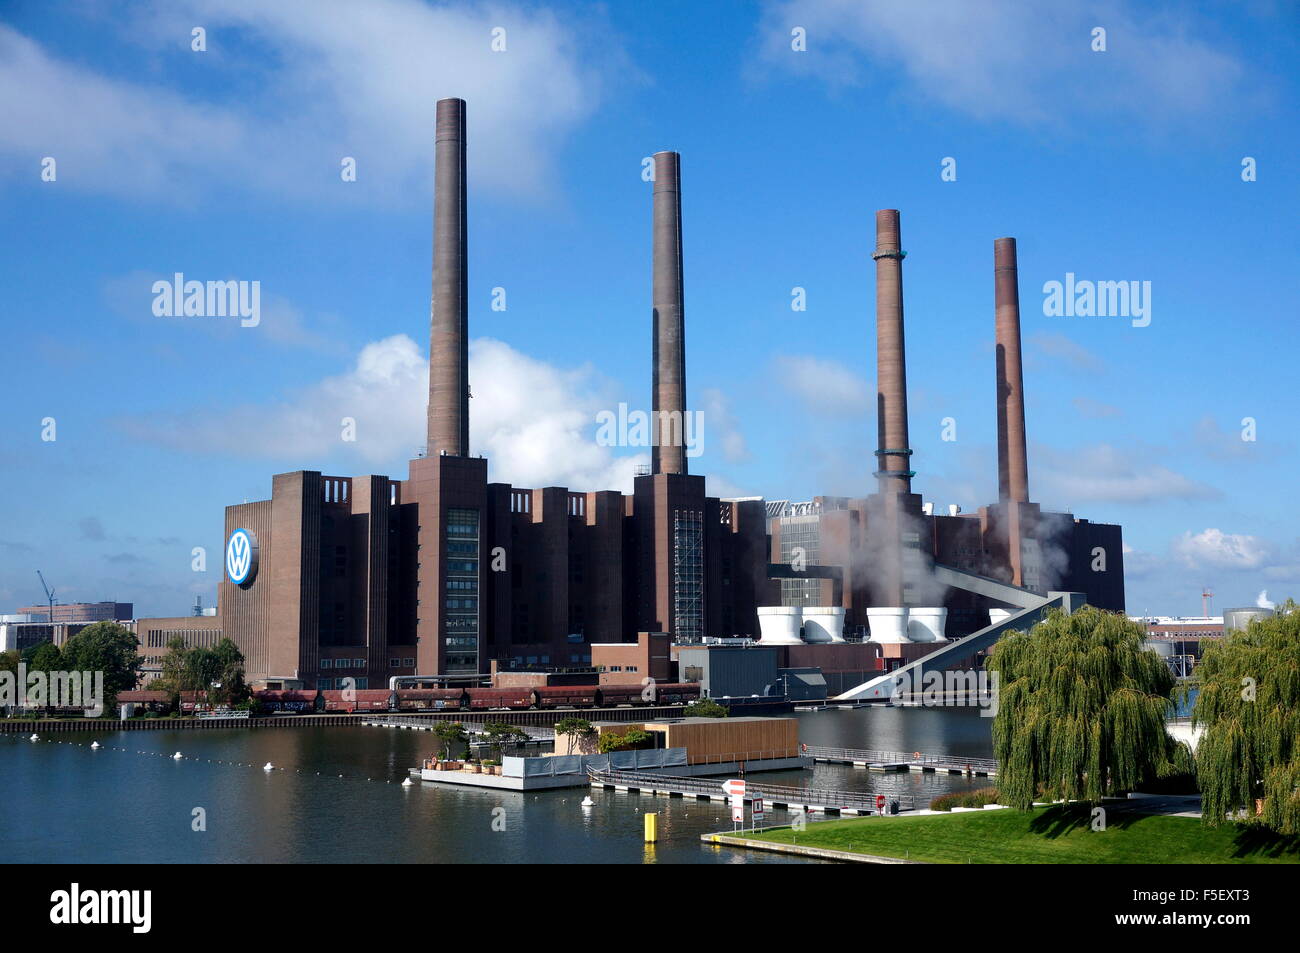 The Volkswagen factory in Wolfsburg, Germany. The photo was taken on 30 September 2015. Photo: S. Steinach - NO WIRE SERVICE – Stock Photo